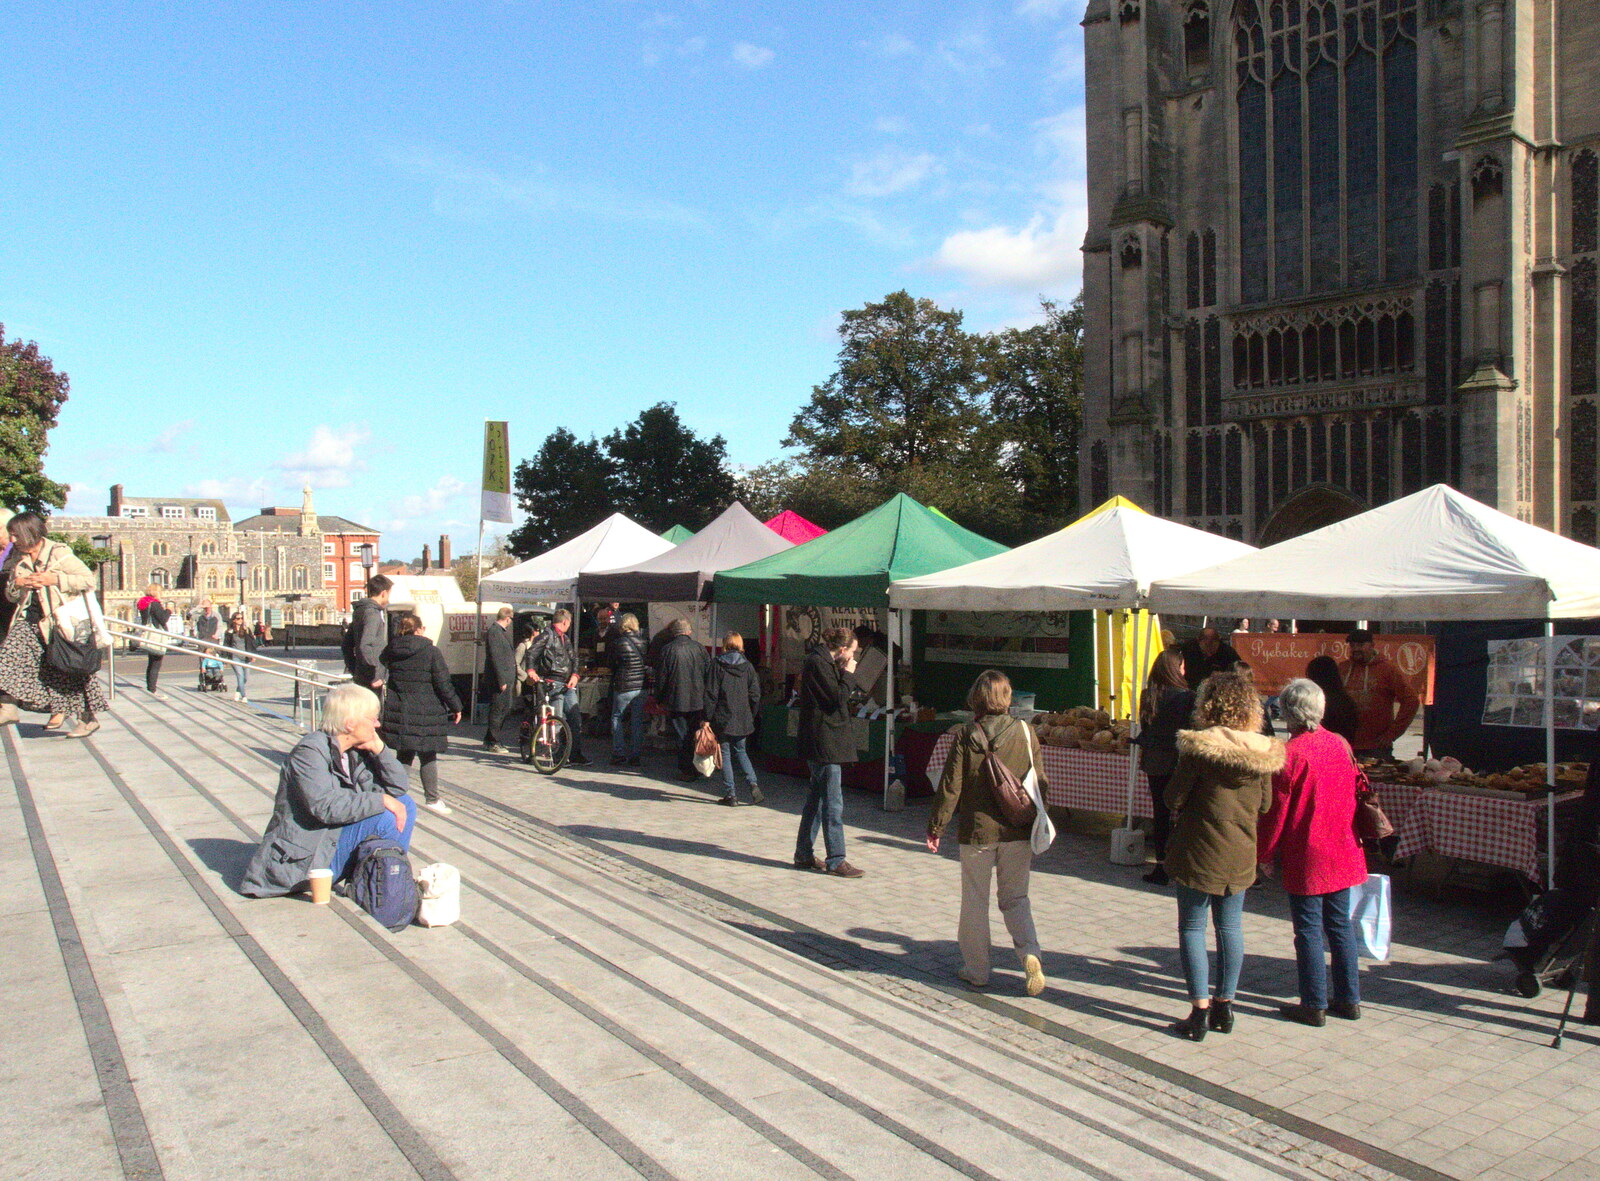 A market outside the Forum in Norwich from An October Miscellany, Suffolk - 8th October 2016